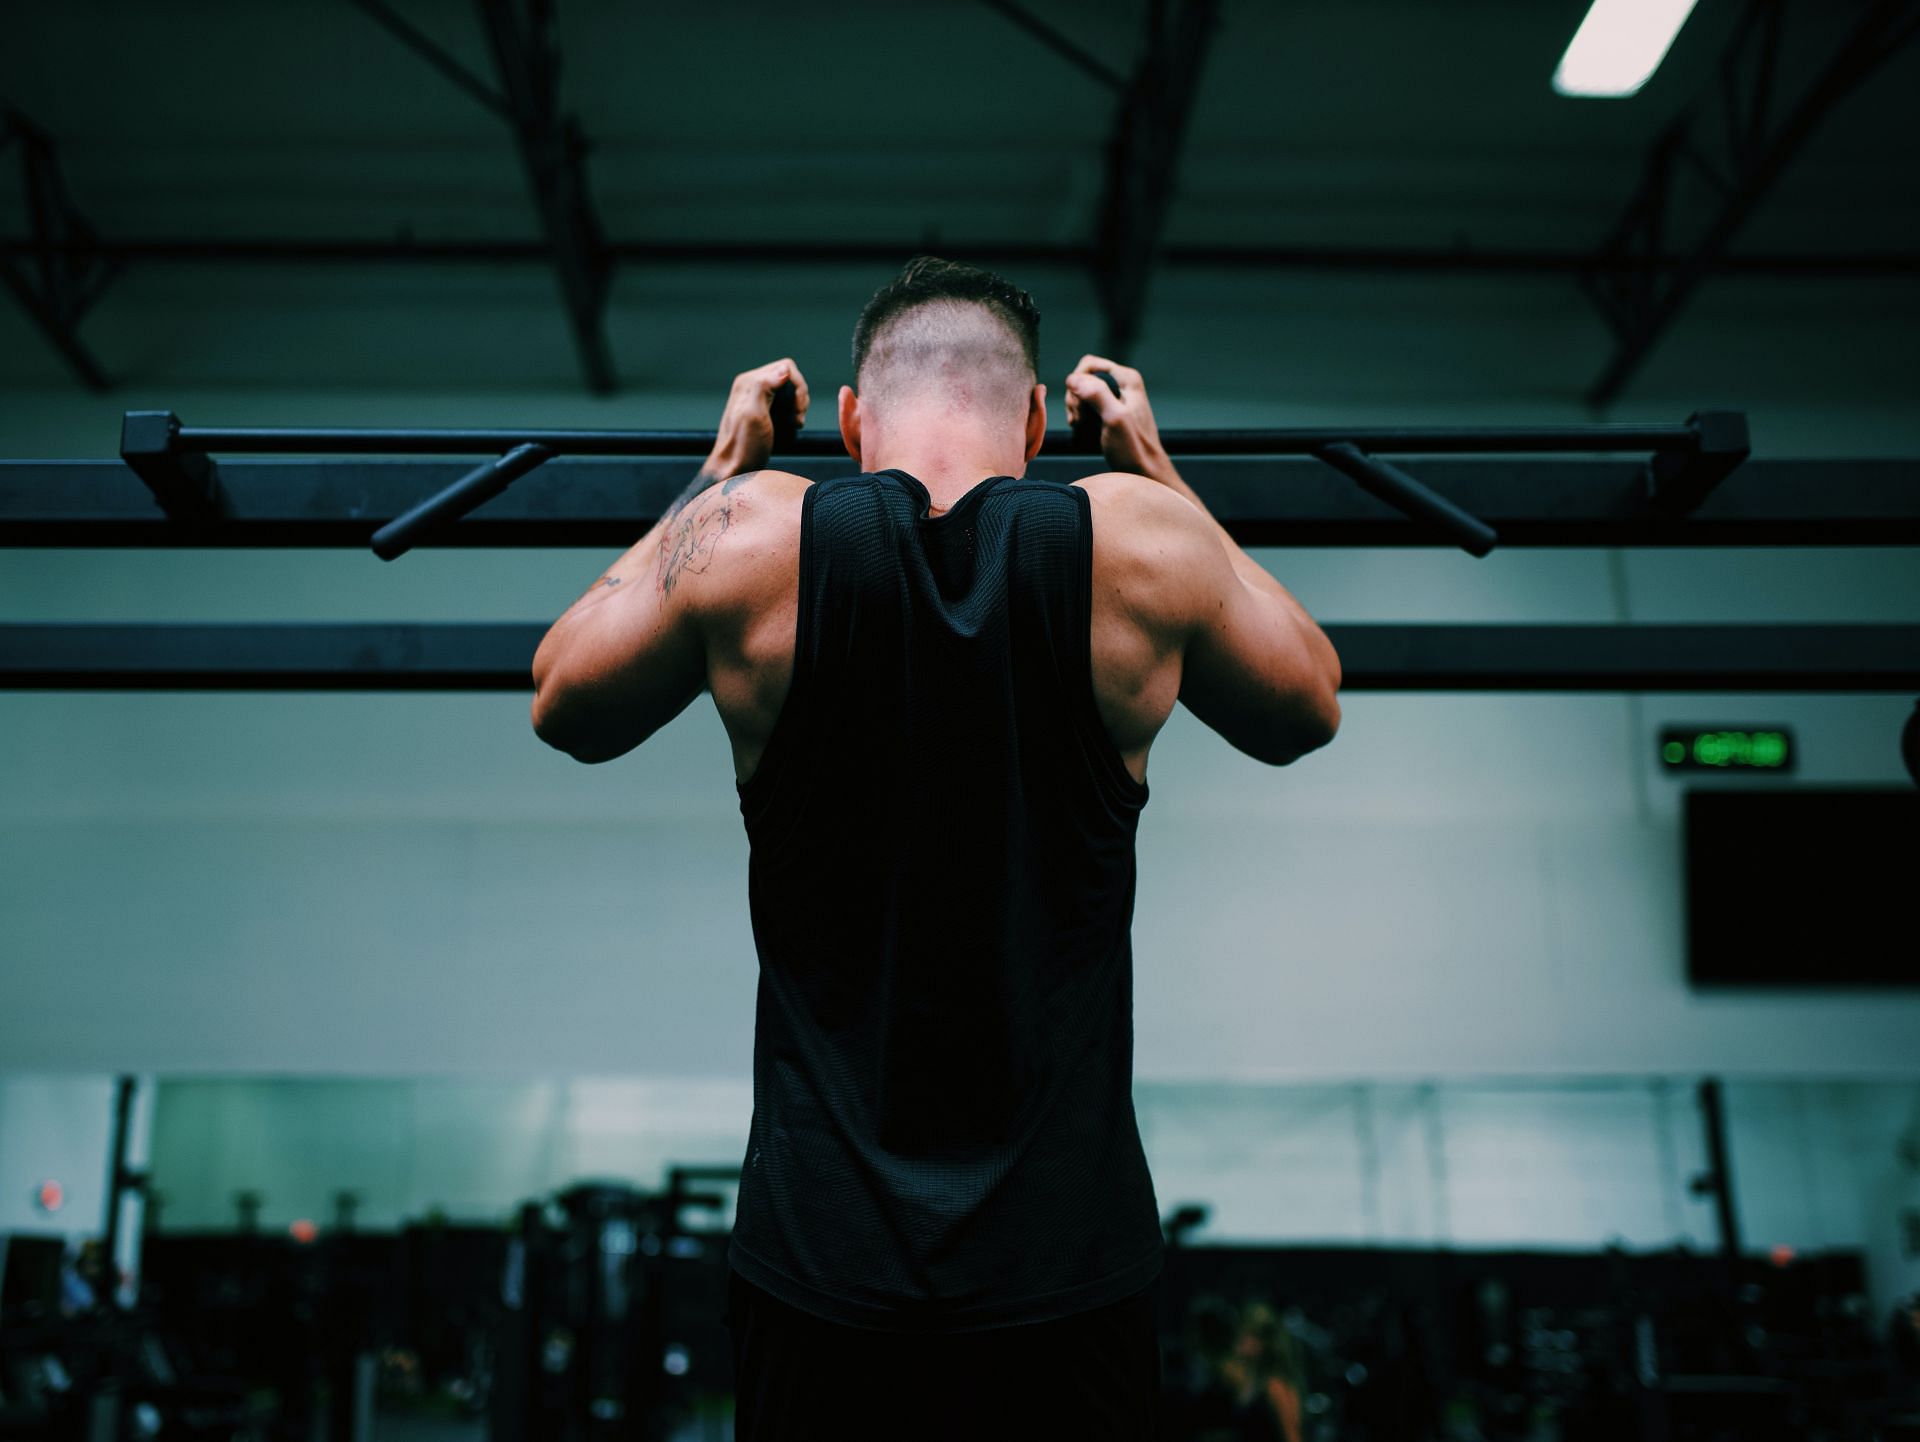 increased energy level during workout. (Image via Unsplash / Gordon Cowie)